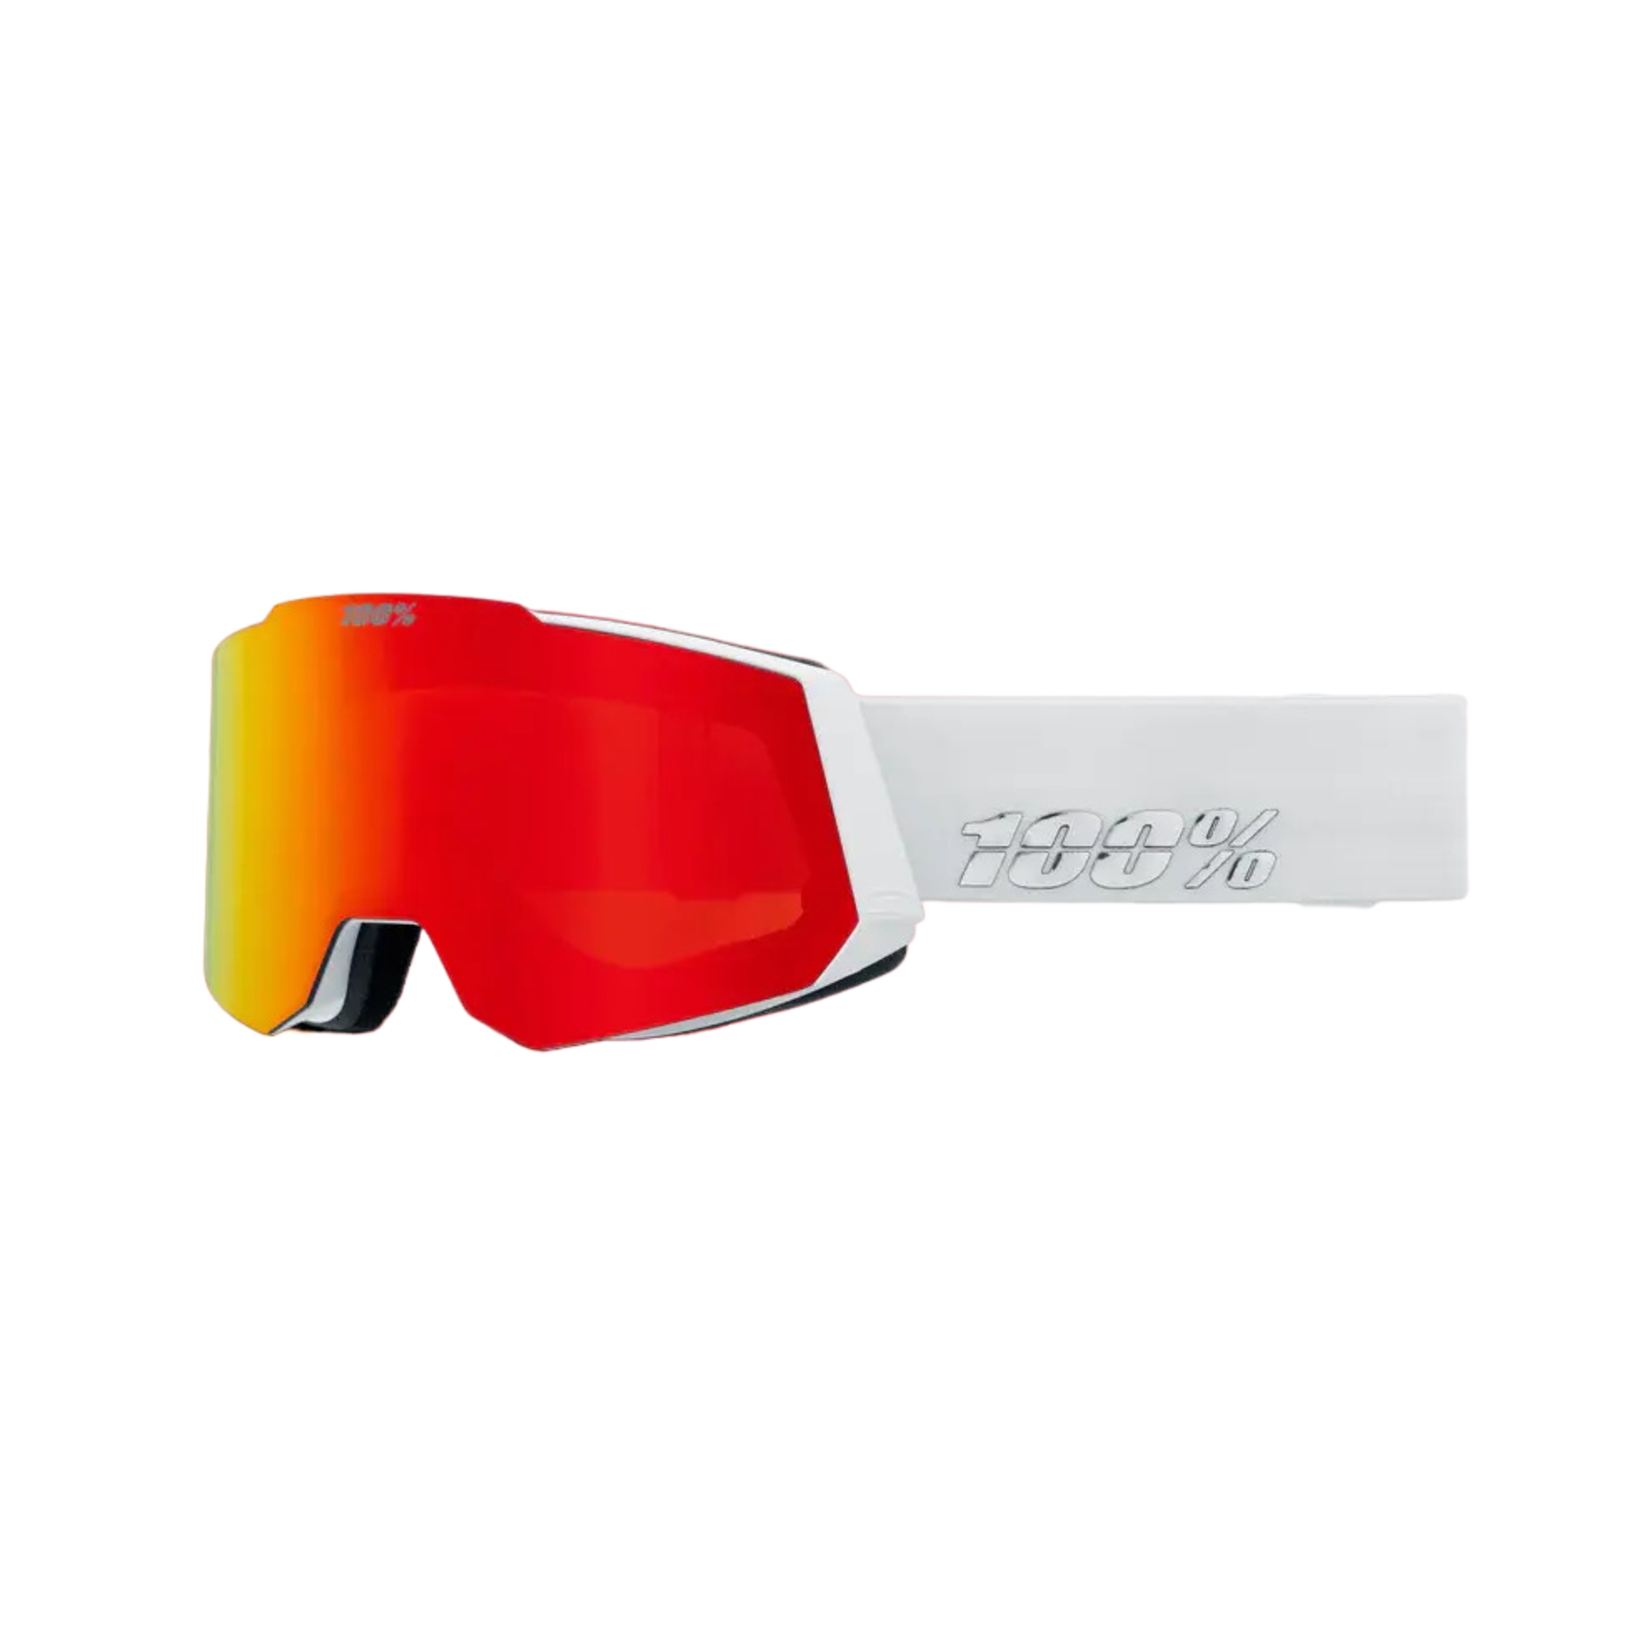 100percent 100% Snowcraft Goggle - White/Red and Turquoise Lens